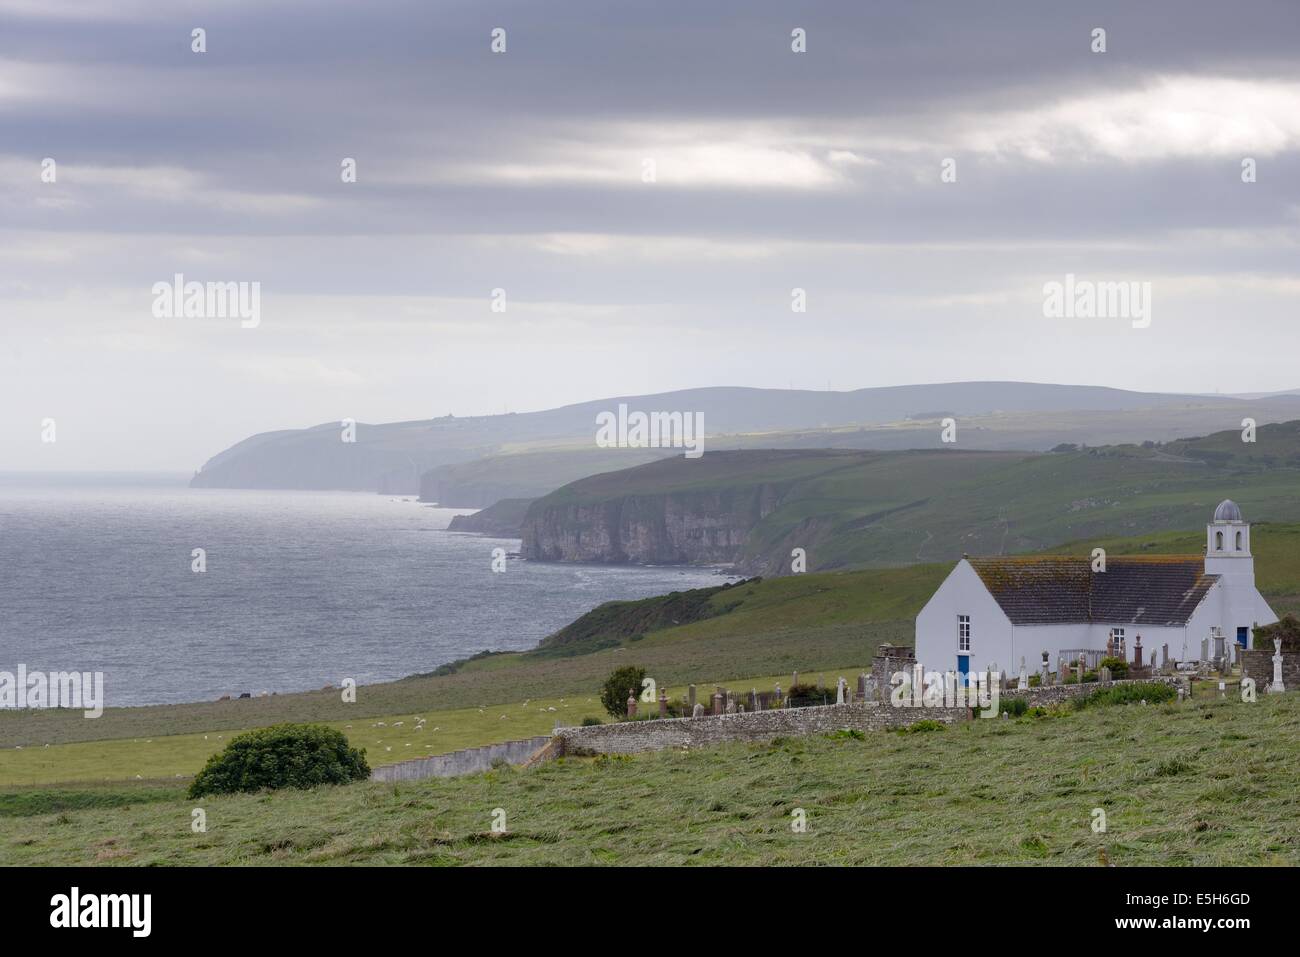 The small Clan Gunn museum overlooking the cliffs in Latheron, Caithness, Scotland, UK Stock Photo